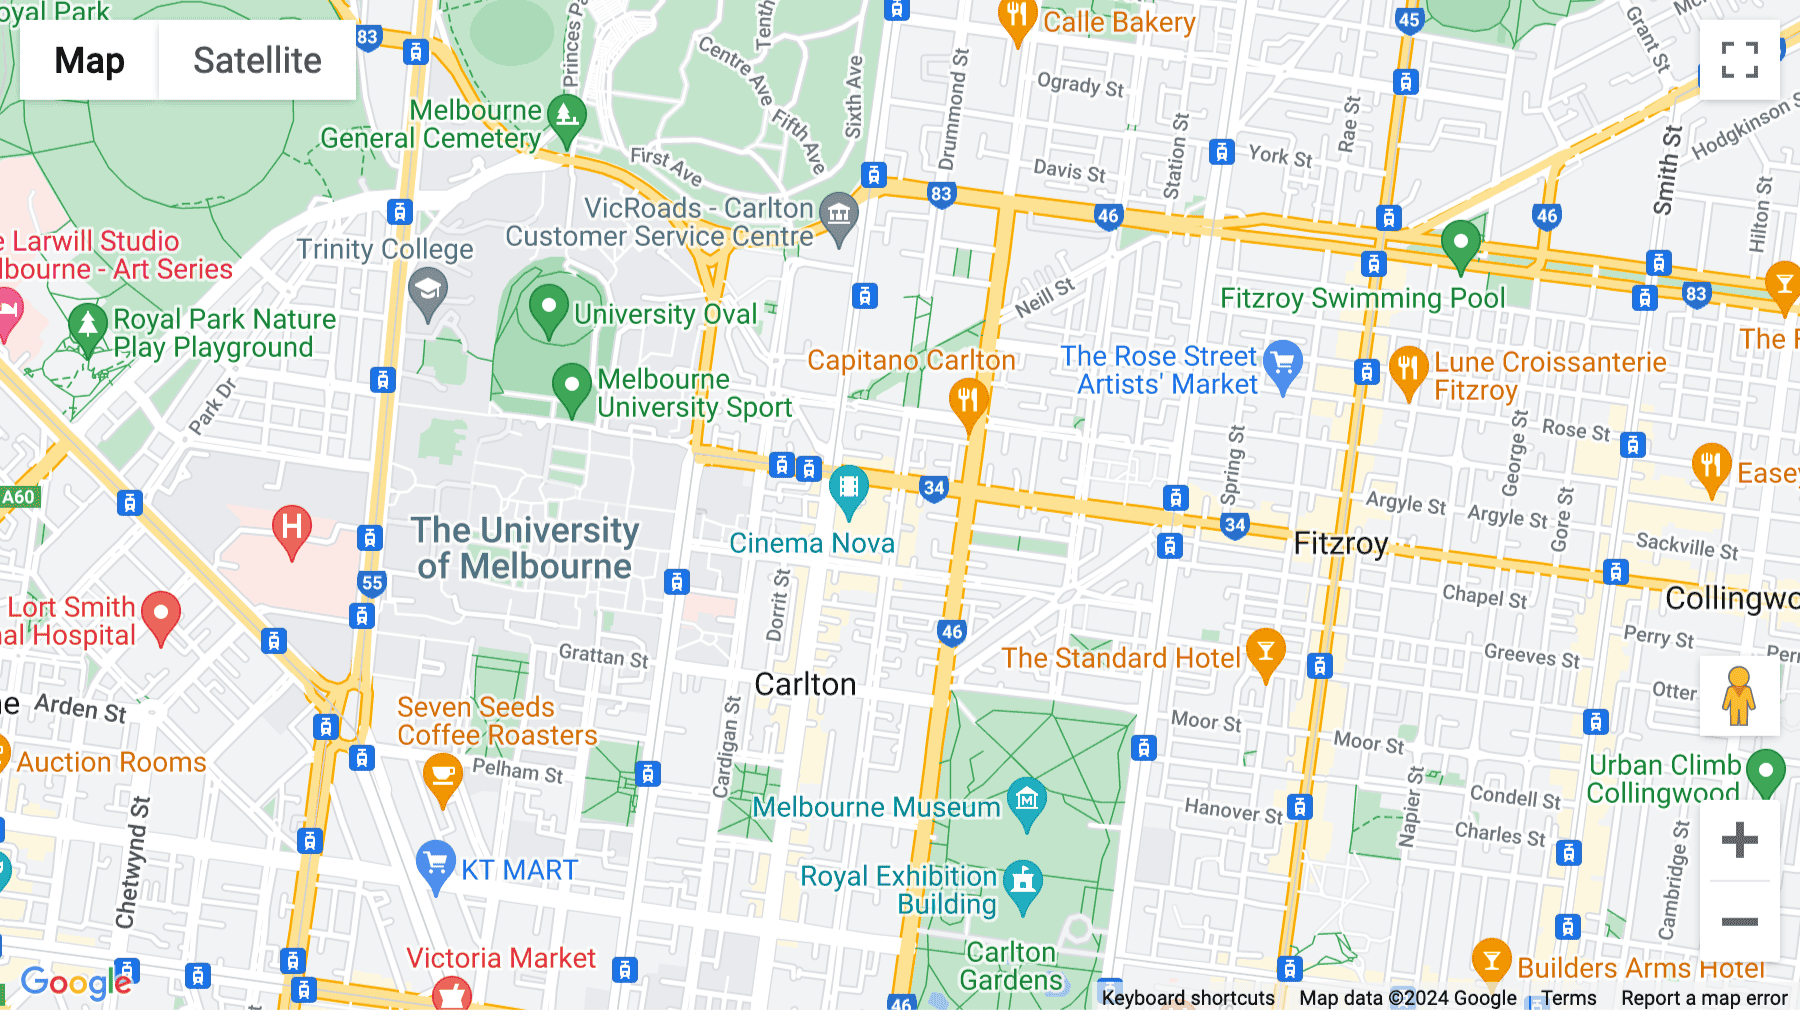 Click for interative map of 333 Drummond Street, Carlton, Melbourne